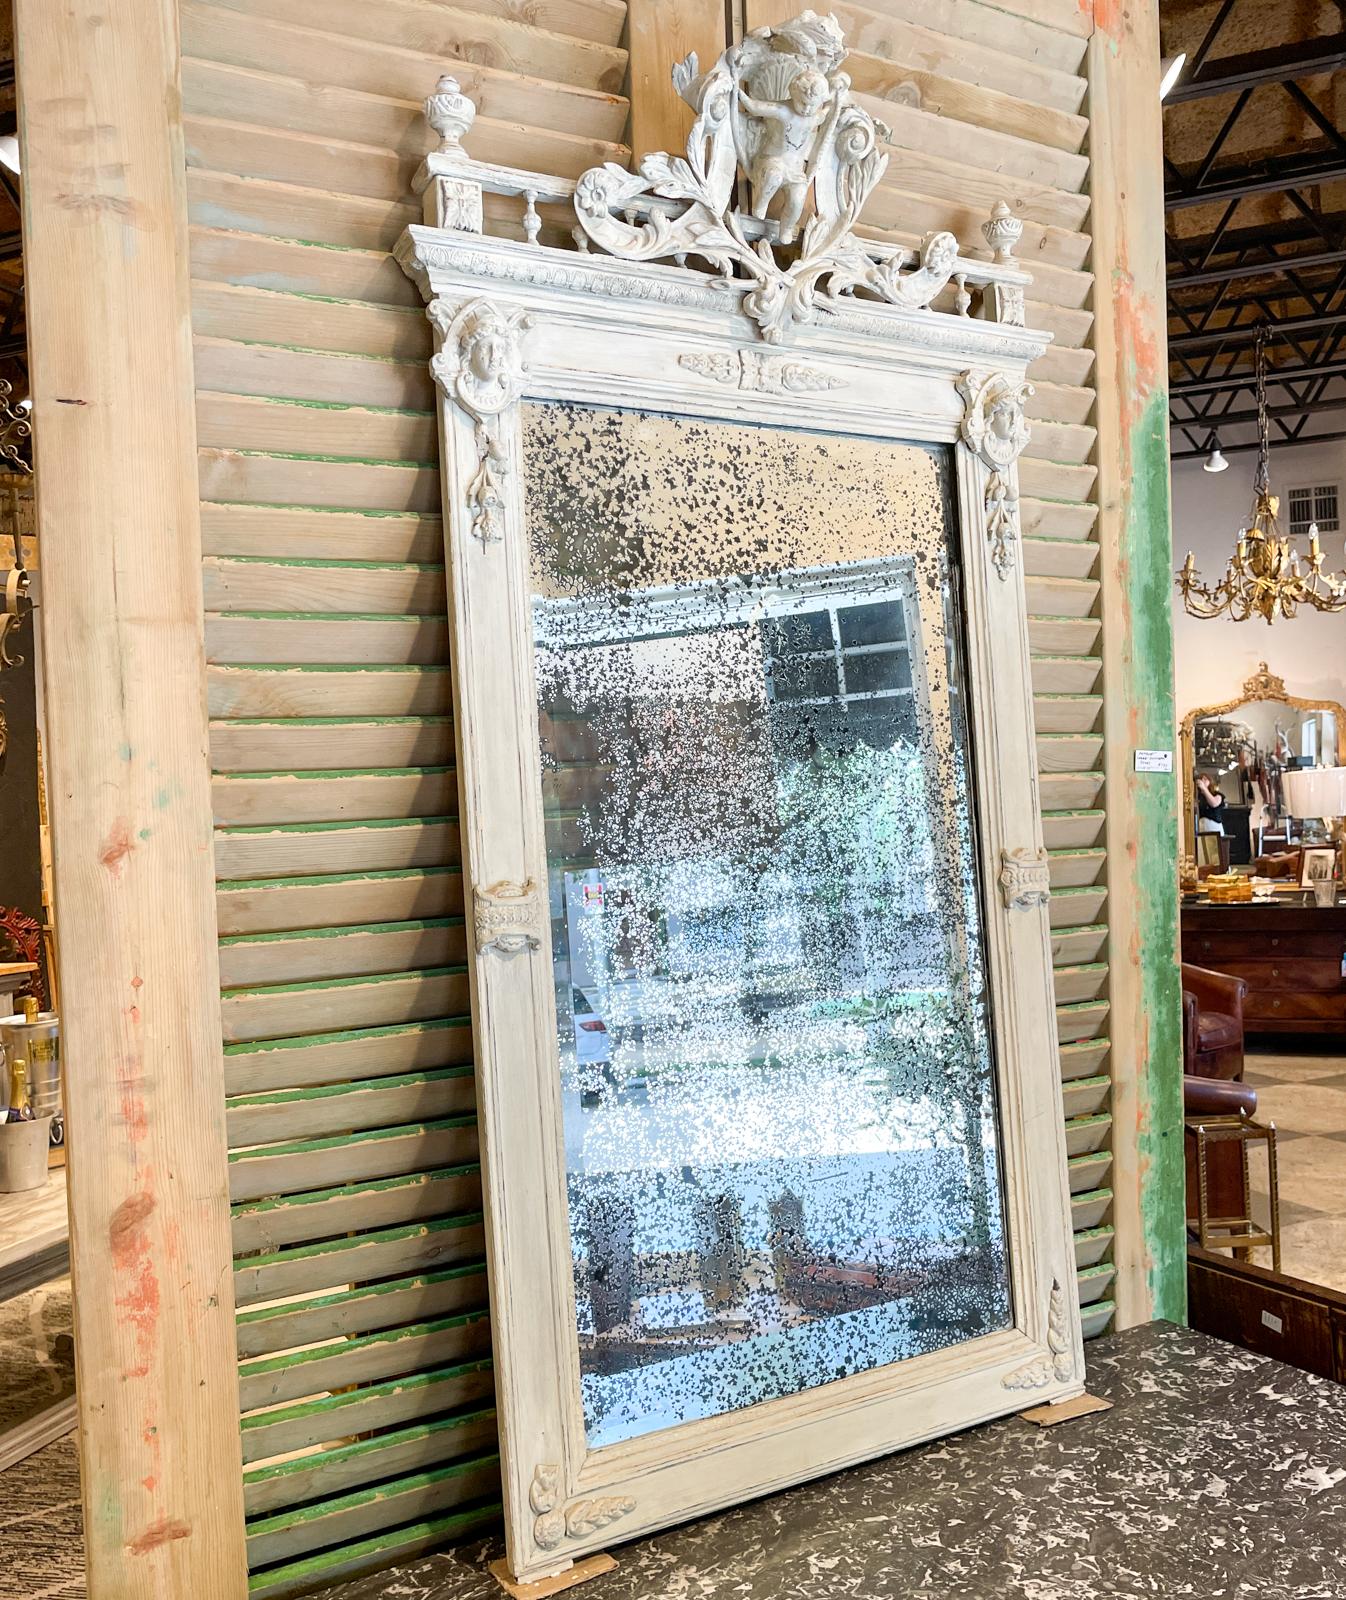 This antique French mirror features a beautifully carved frame and beveled glass with distressed mirror. The frame has ornate floral carvings and details along the sides and bottom edge and a very ornately decorated top edge, including a detailed